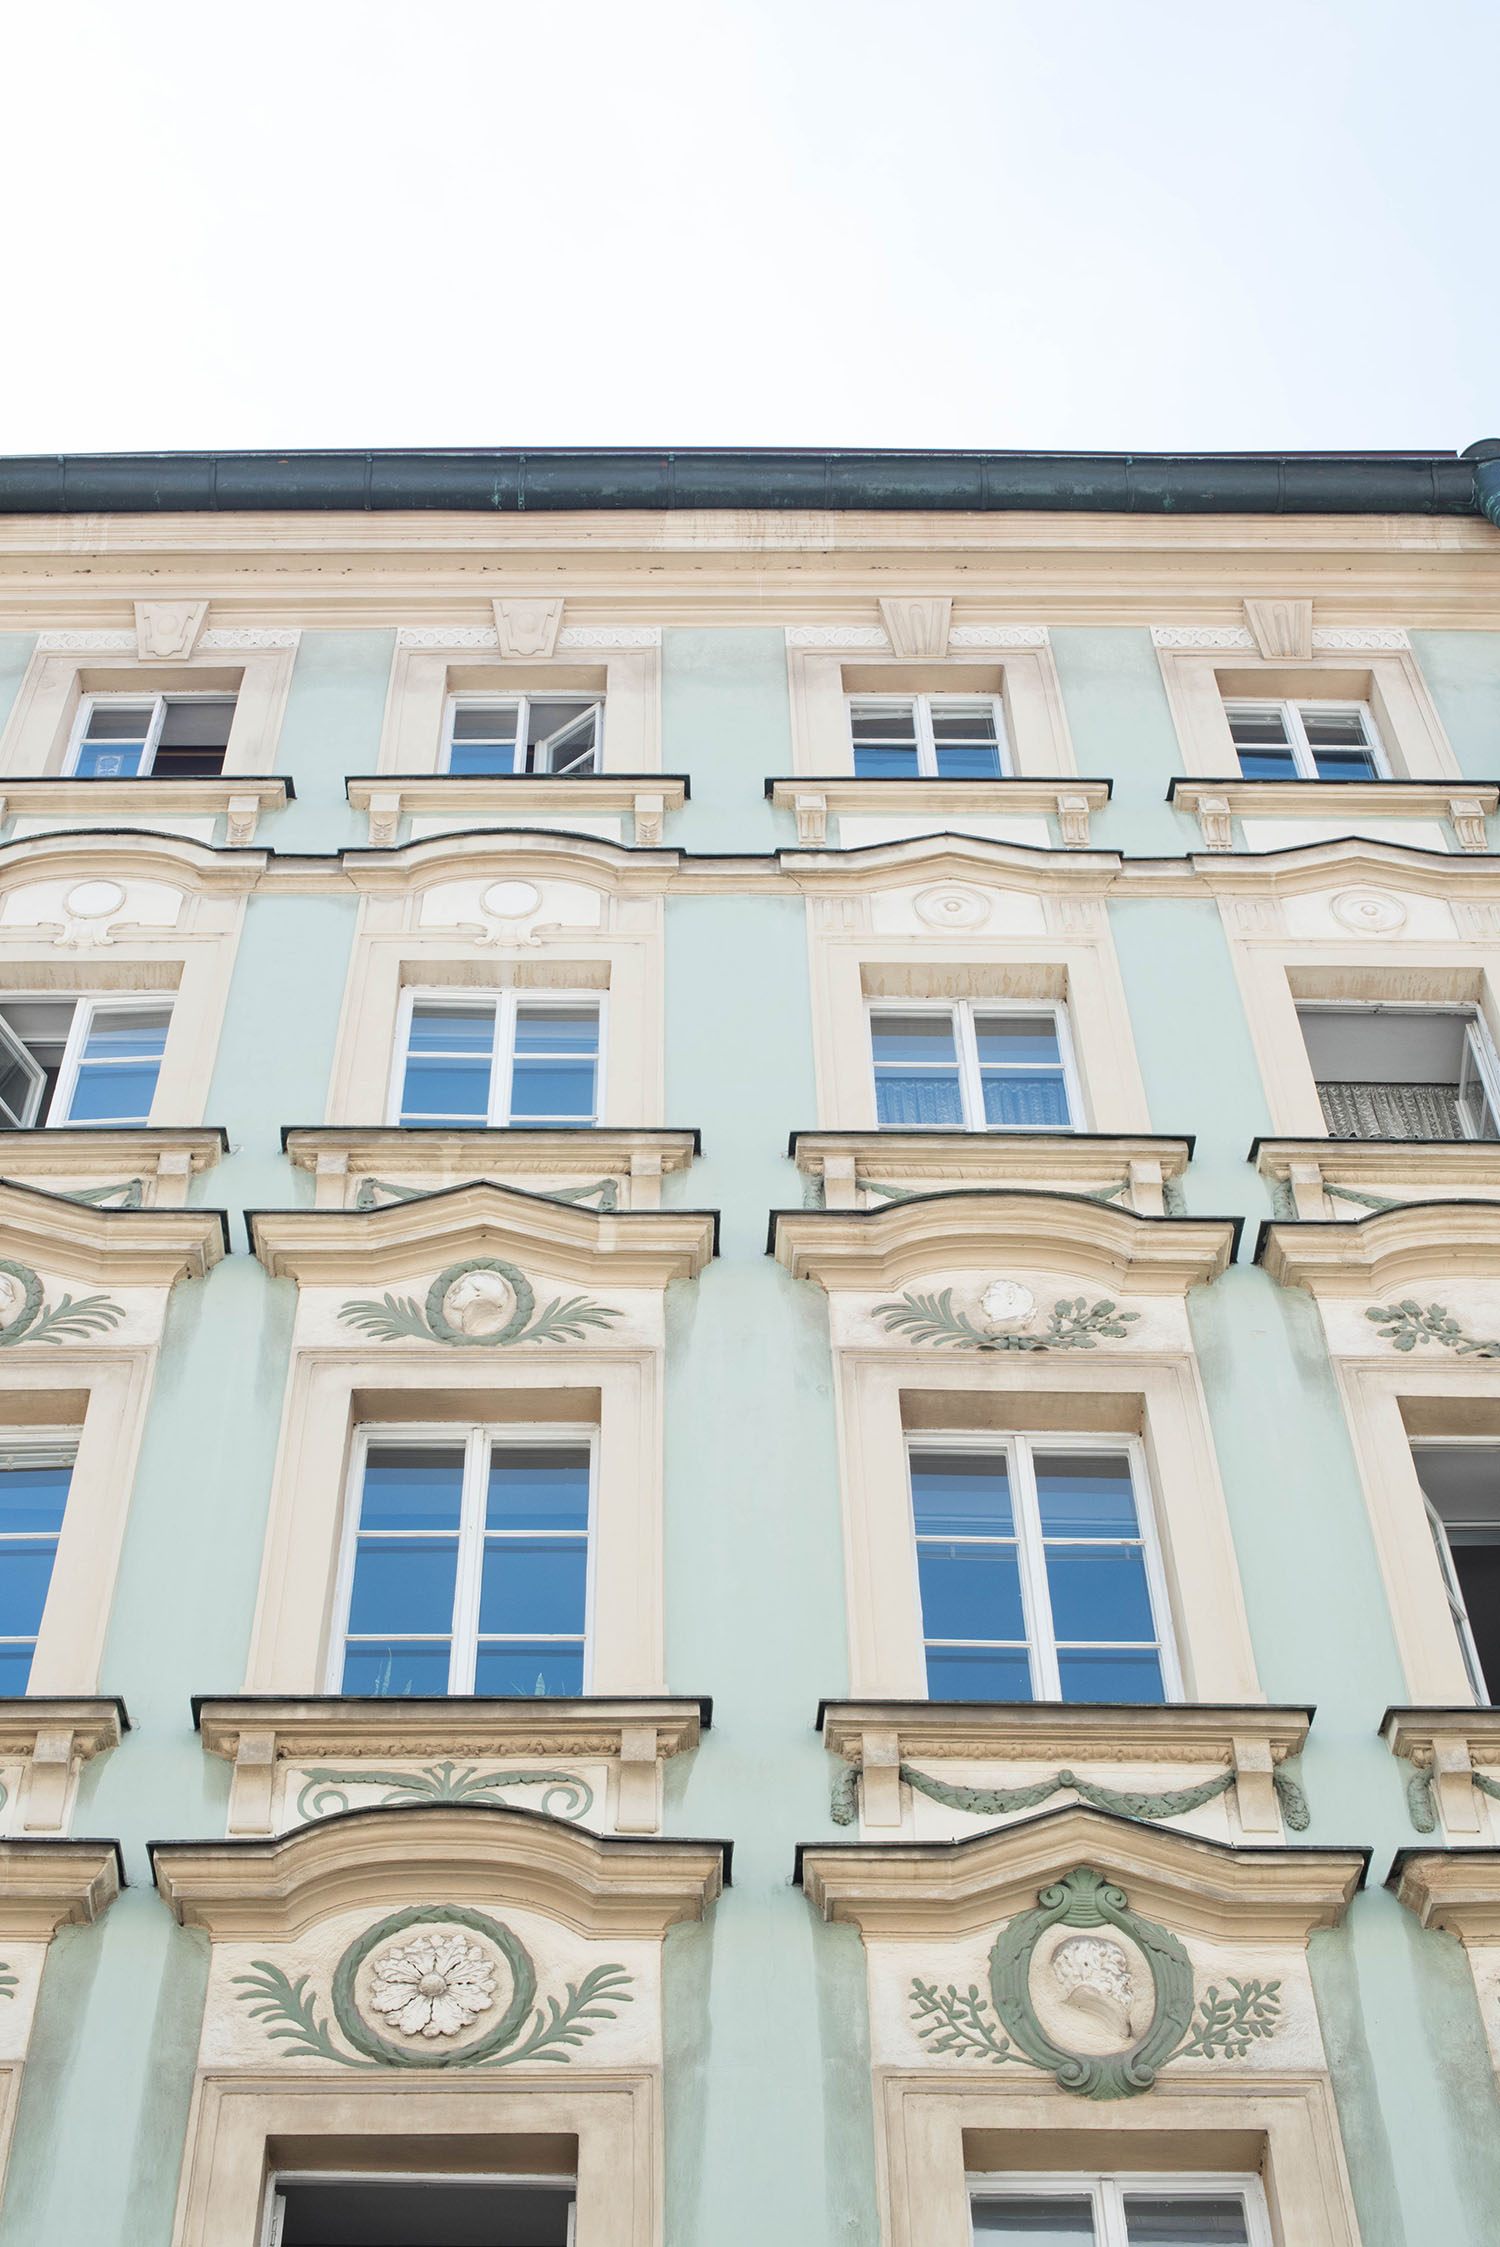 The turquoise facade of a building in Prague's Old Town, as captured by Canadian travel blogger Cee Fardoe of Coco & Vera